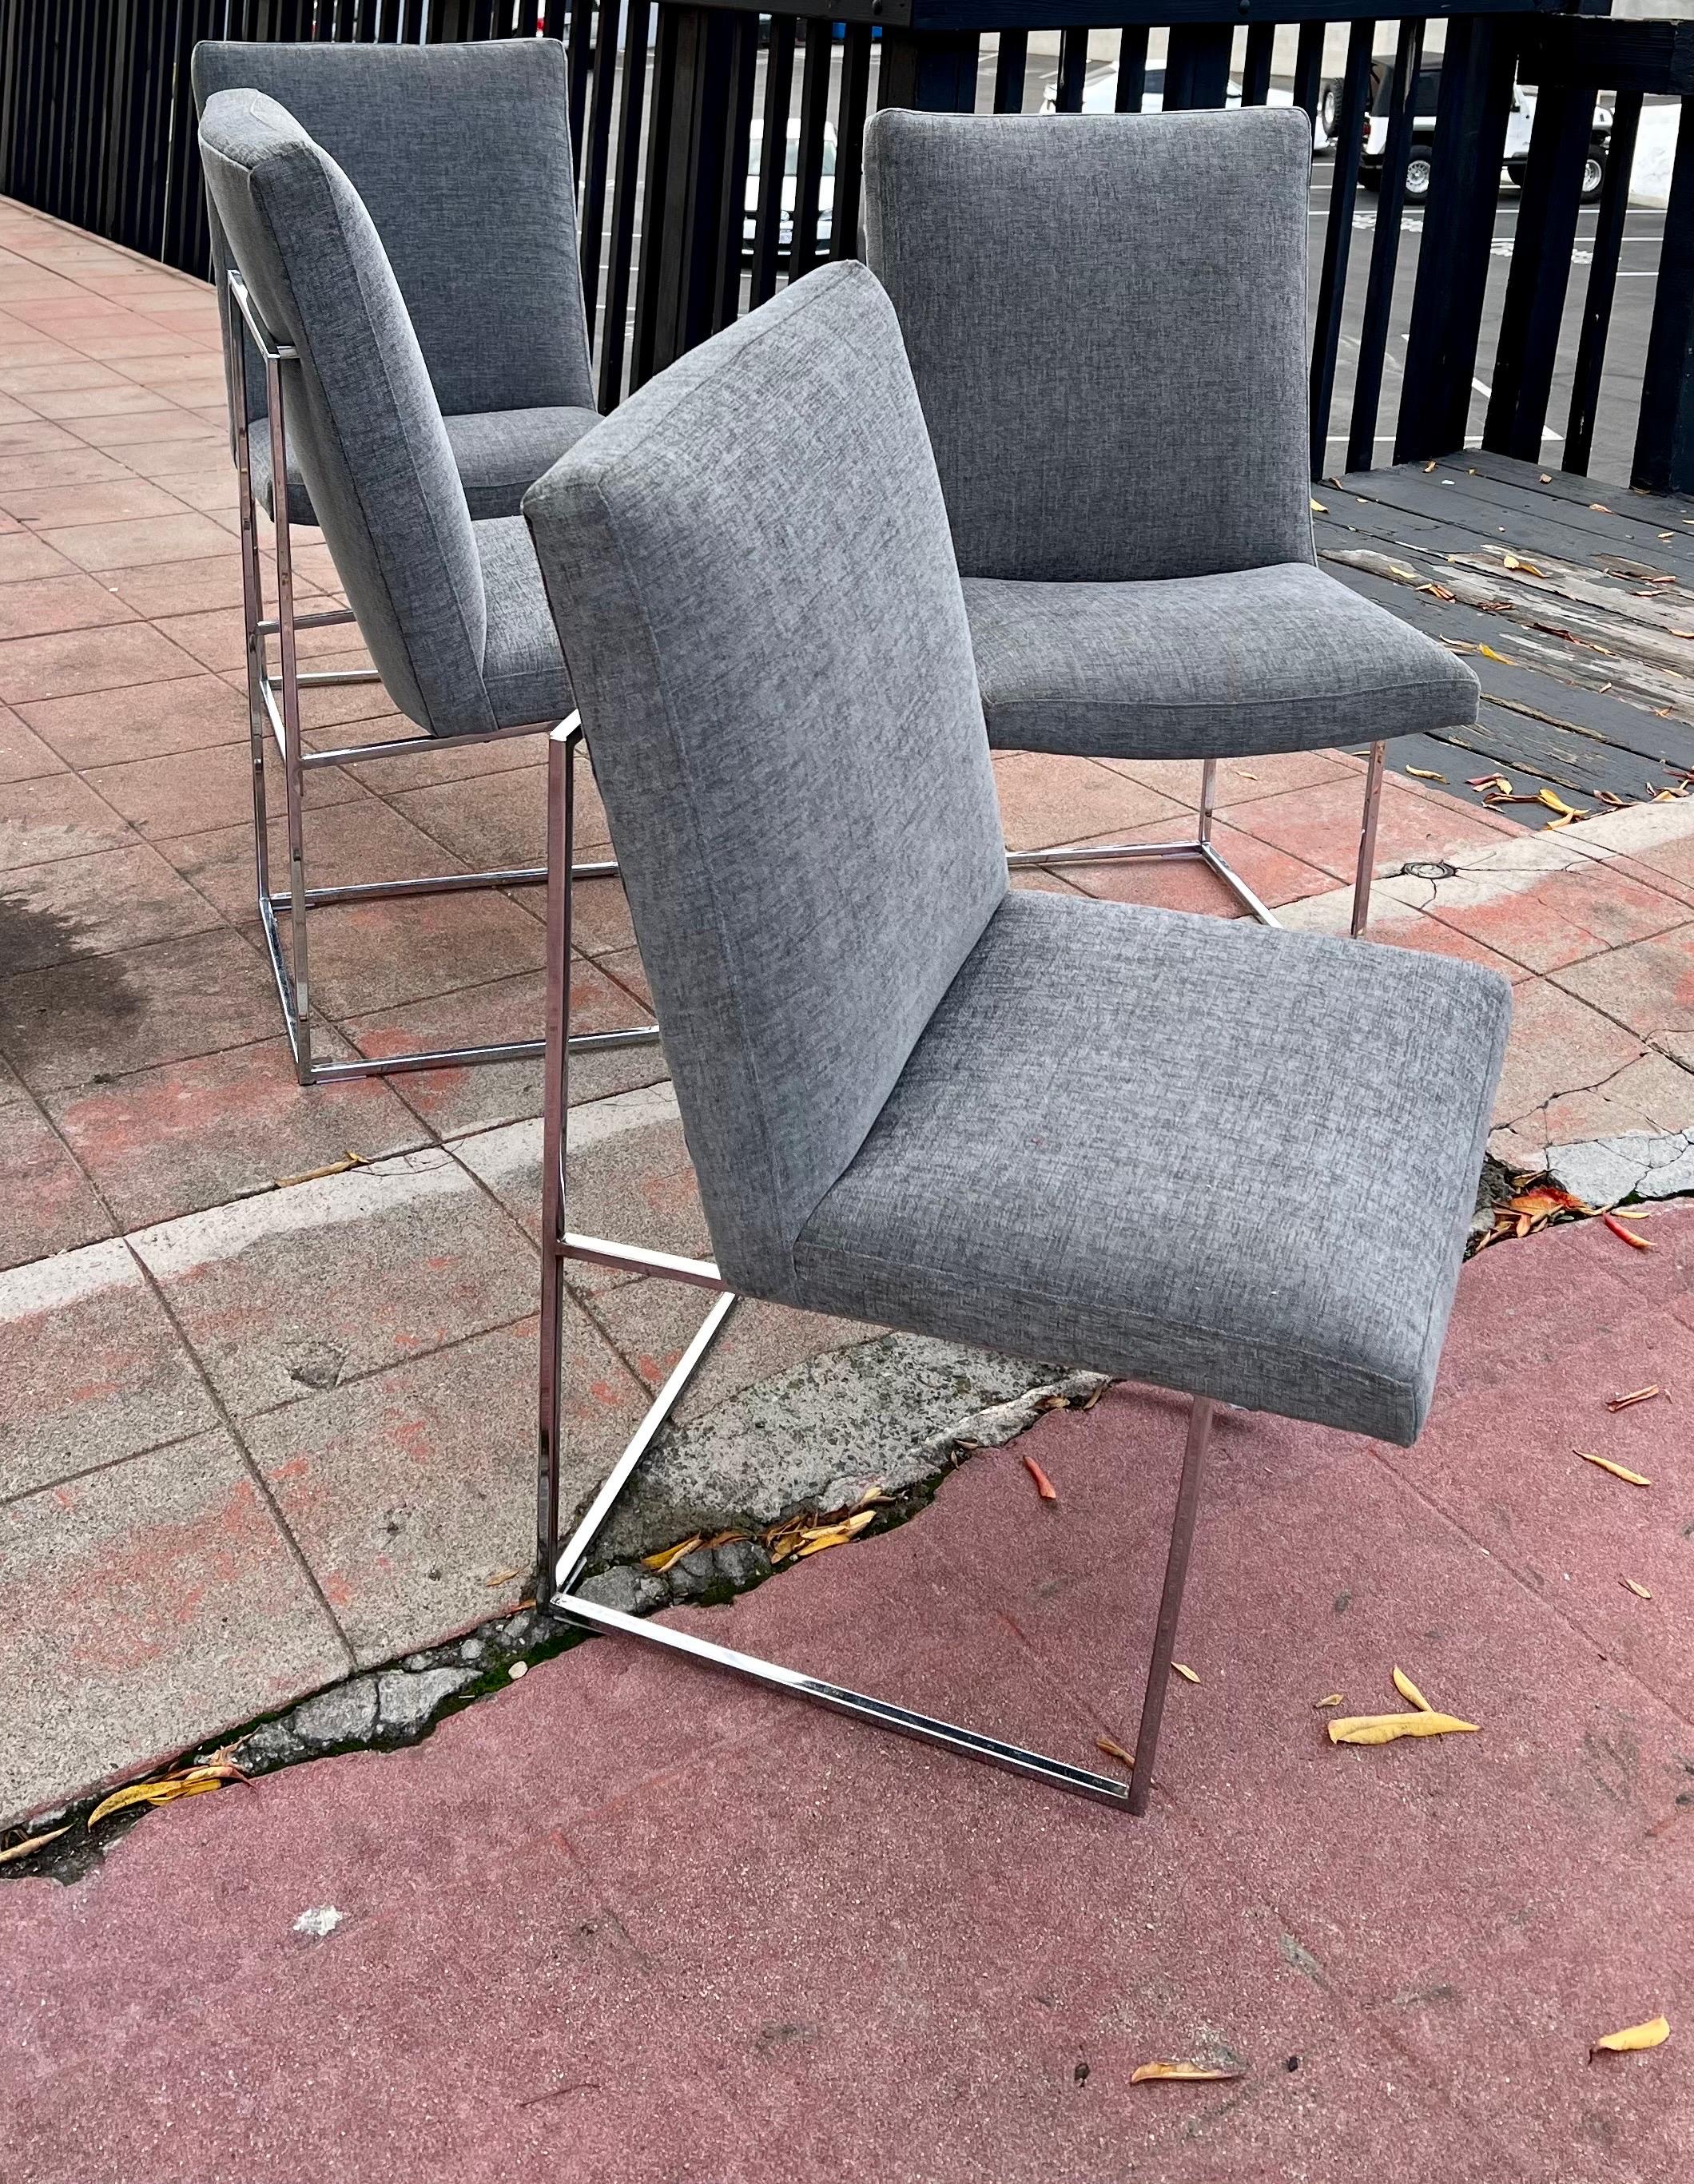 Great set of 4 dining chairs designed by Milo Baughman with chrome bases, The chairs have a polished chrome base. the fabric is made by Knoll. we have put new upholstery on the set they look great.